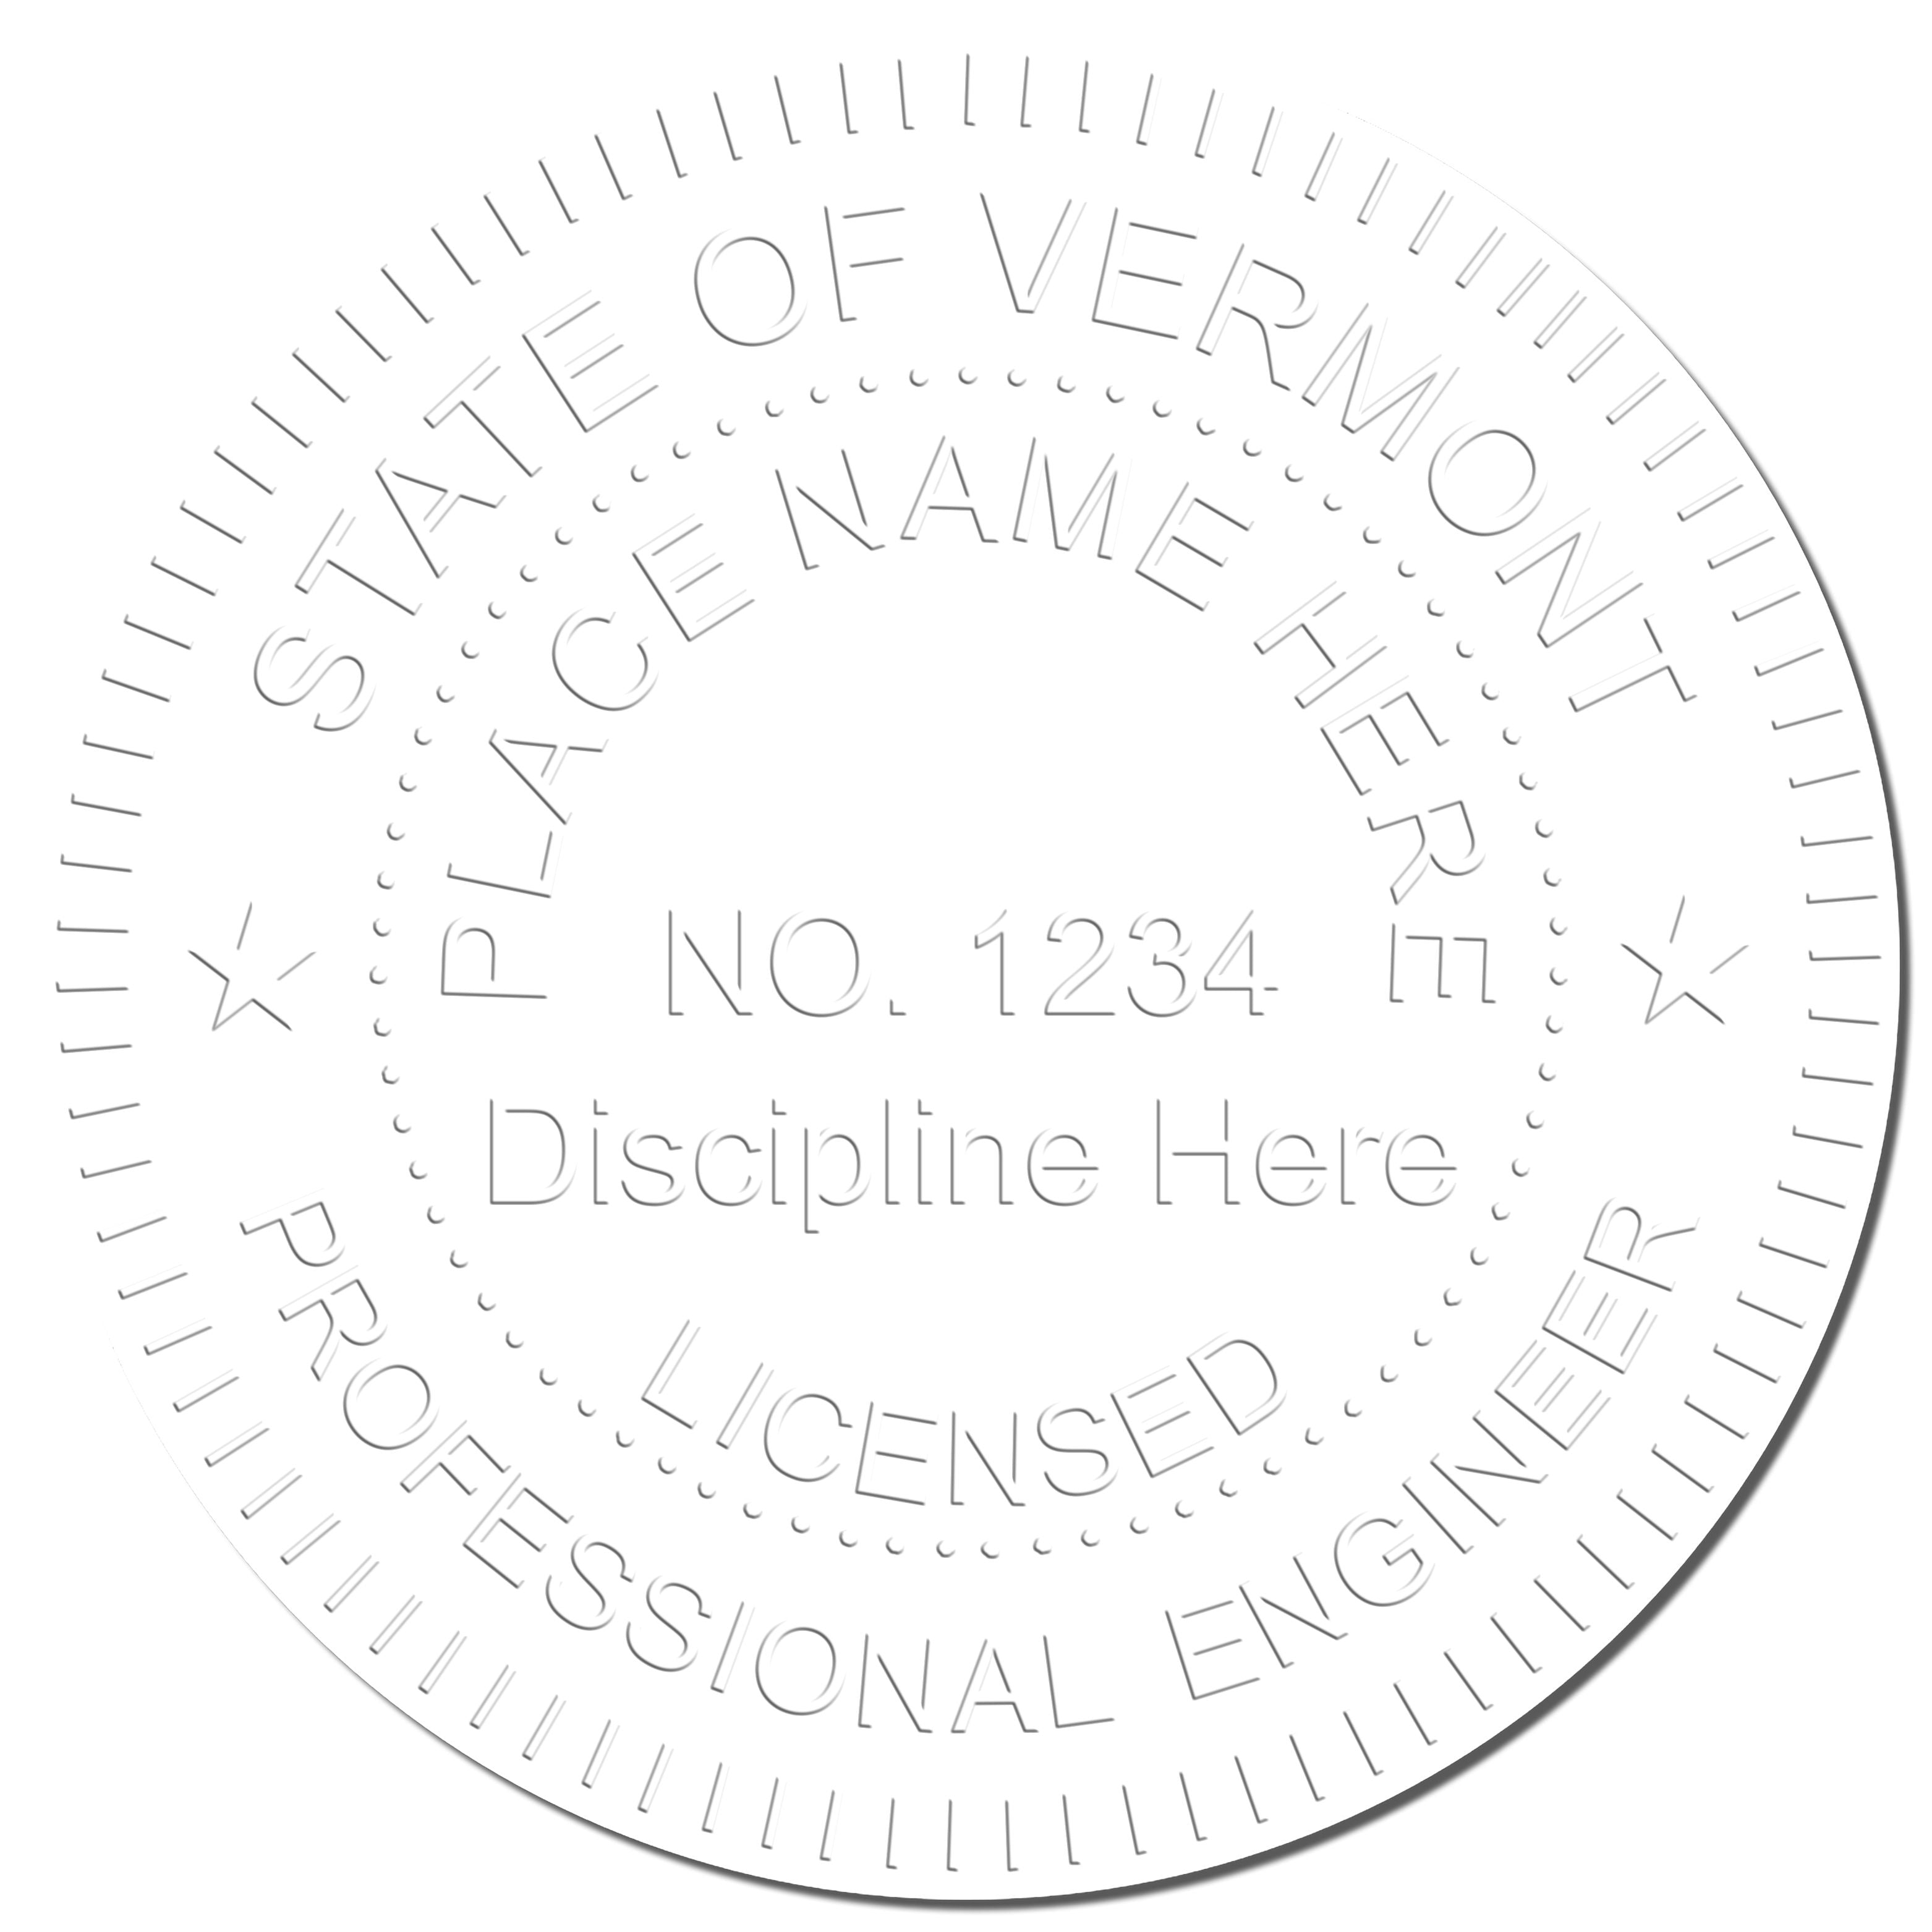 This paper is stamped with a sample imprint of the Gift Vermont Engineer Seal, signifying its quality and reliability.